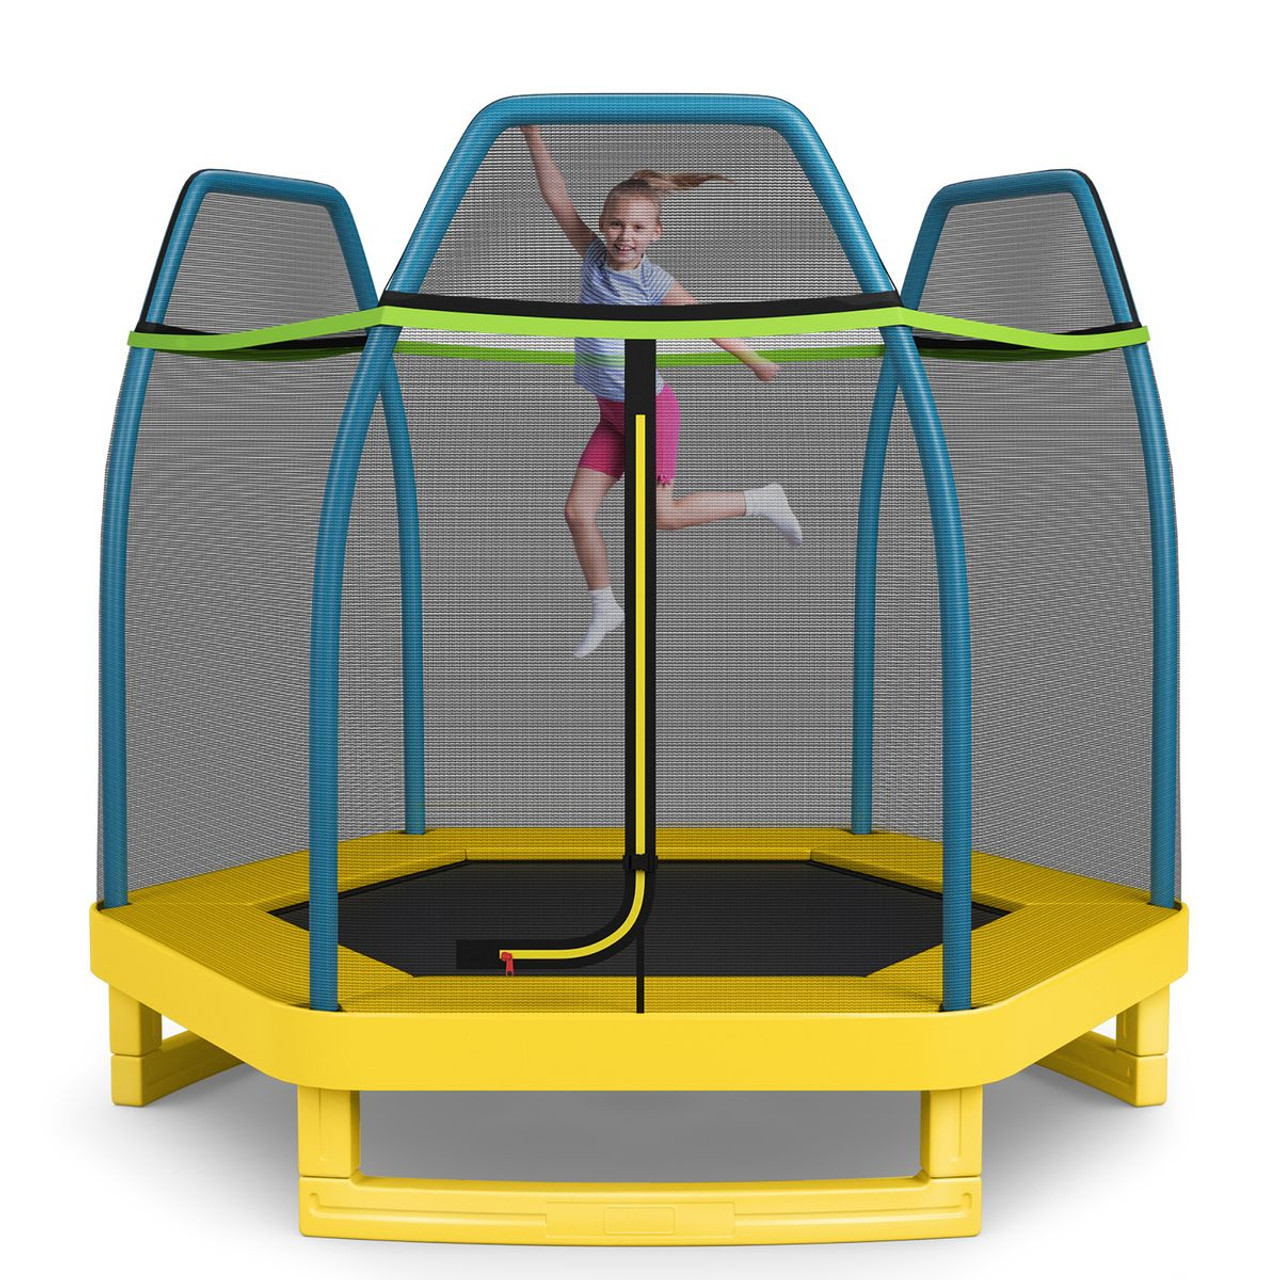 Kids' 7-Foot Trampoline product image